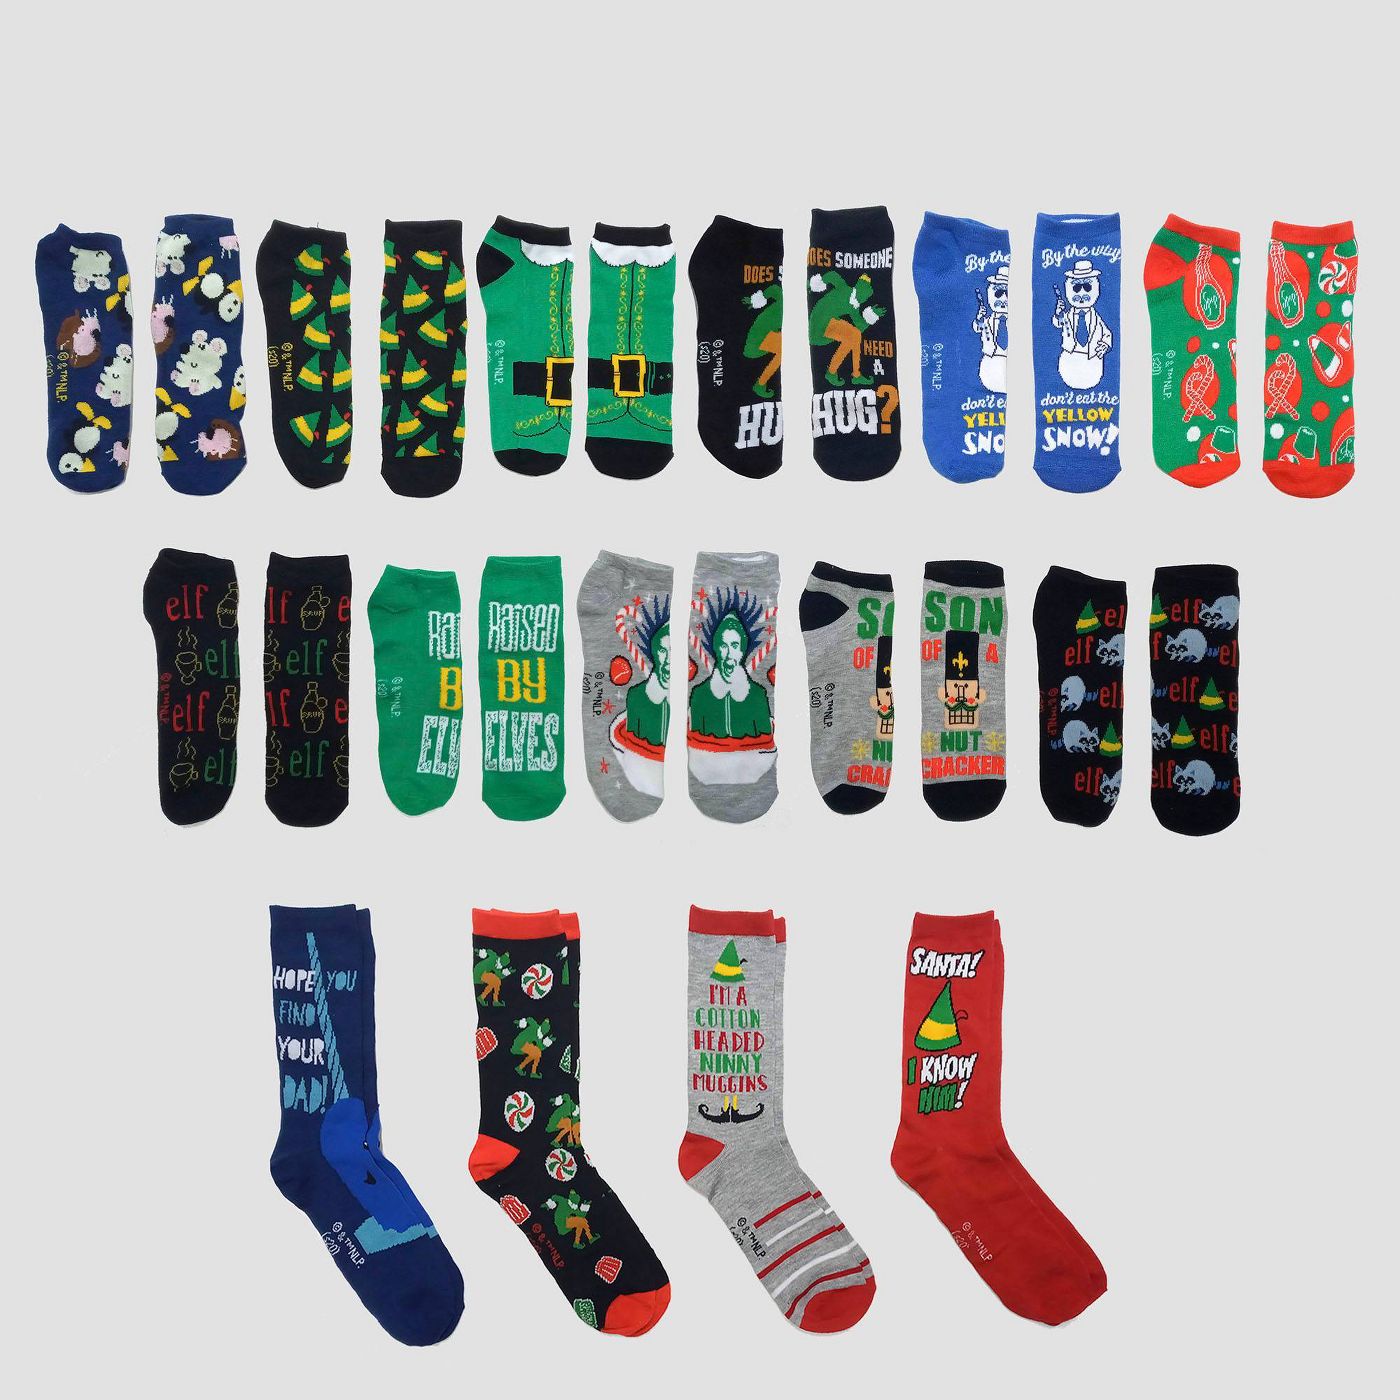 Men's Elf 15 Days of Socks Advent Calendar - Assorted Colors One Size - image 1 of 4